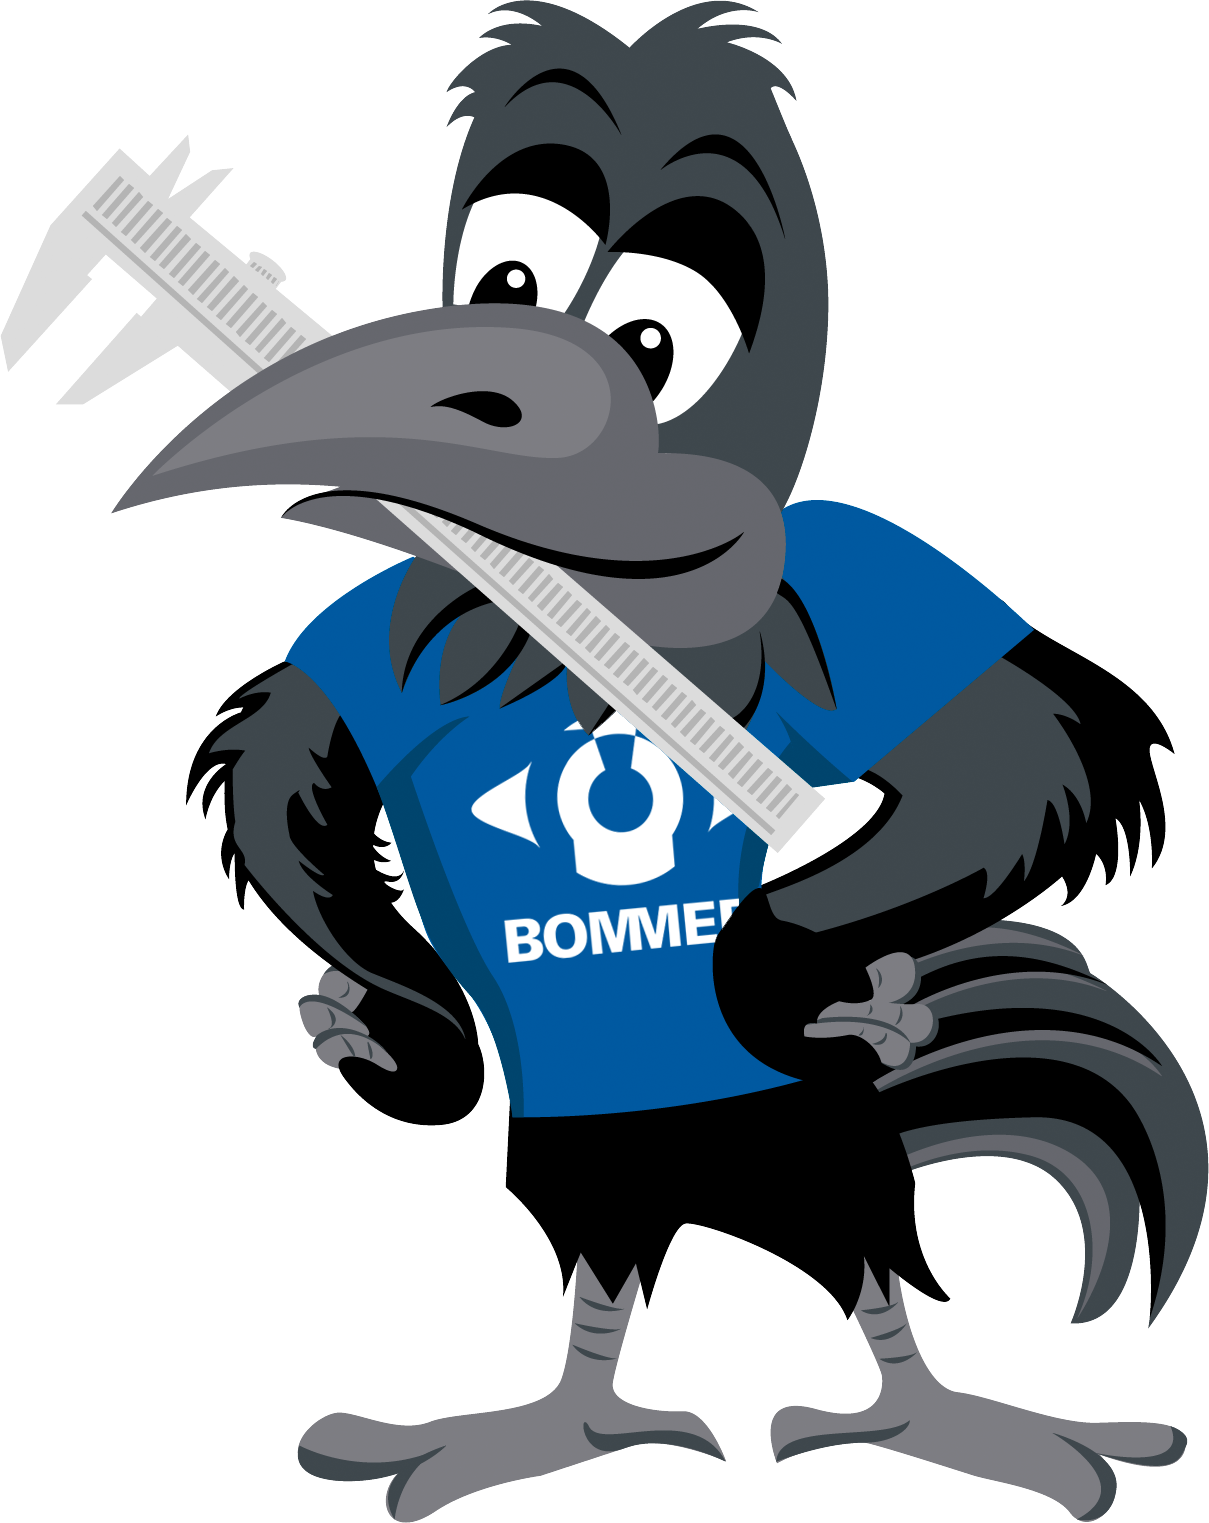 Bommer mascot Bill the Bird with a wrench